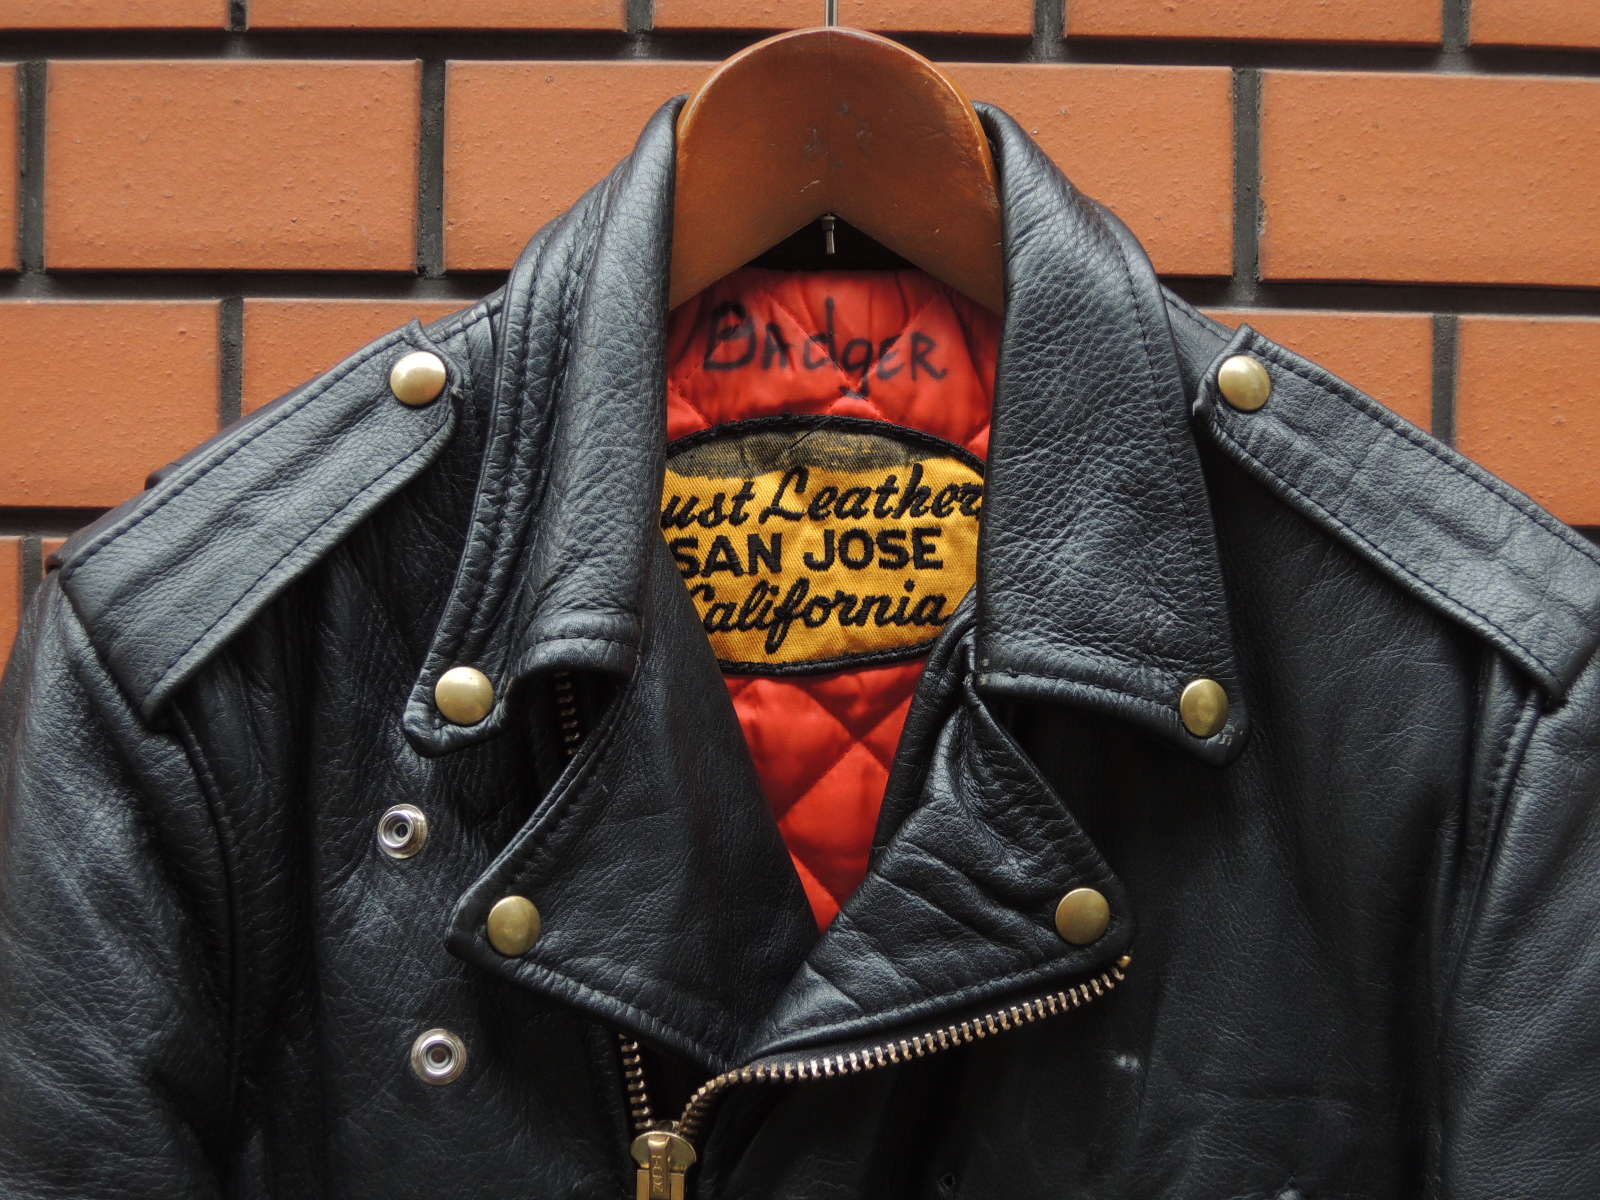 60's Just Leather SAN JOSE riders jacket: container